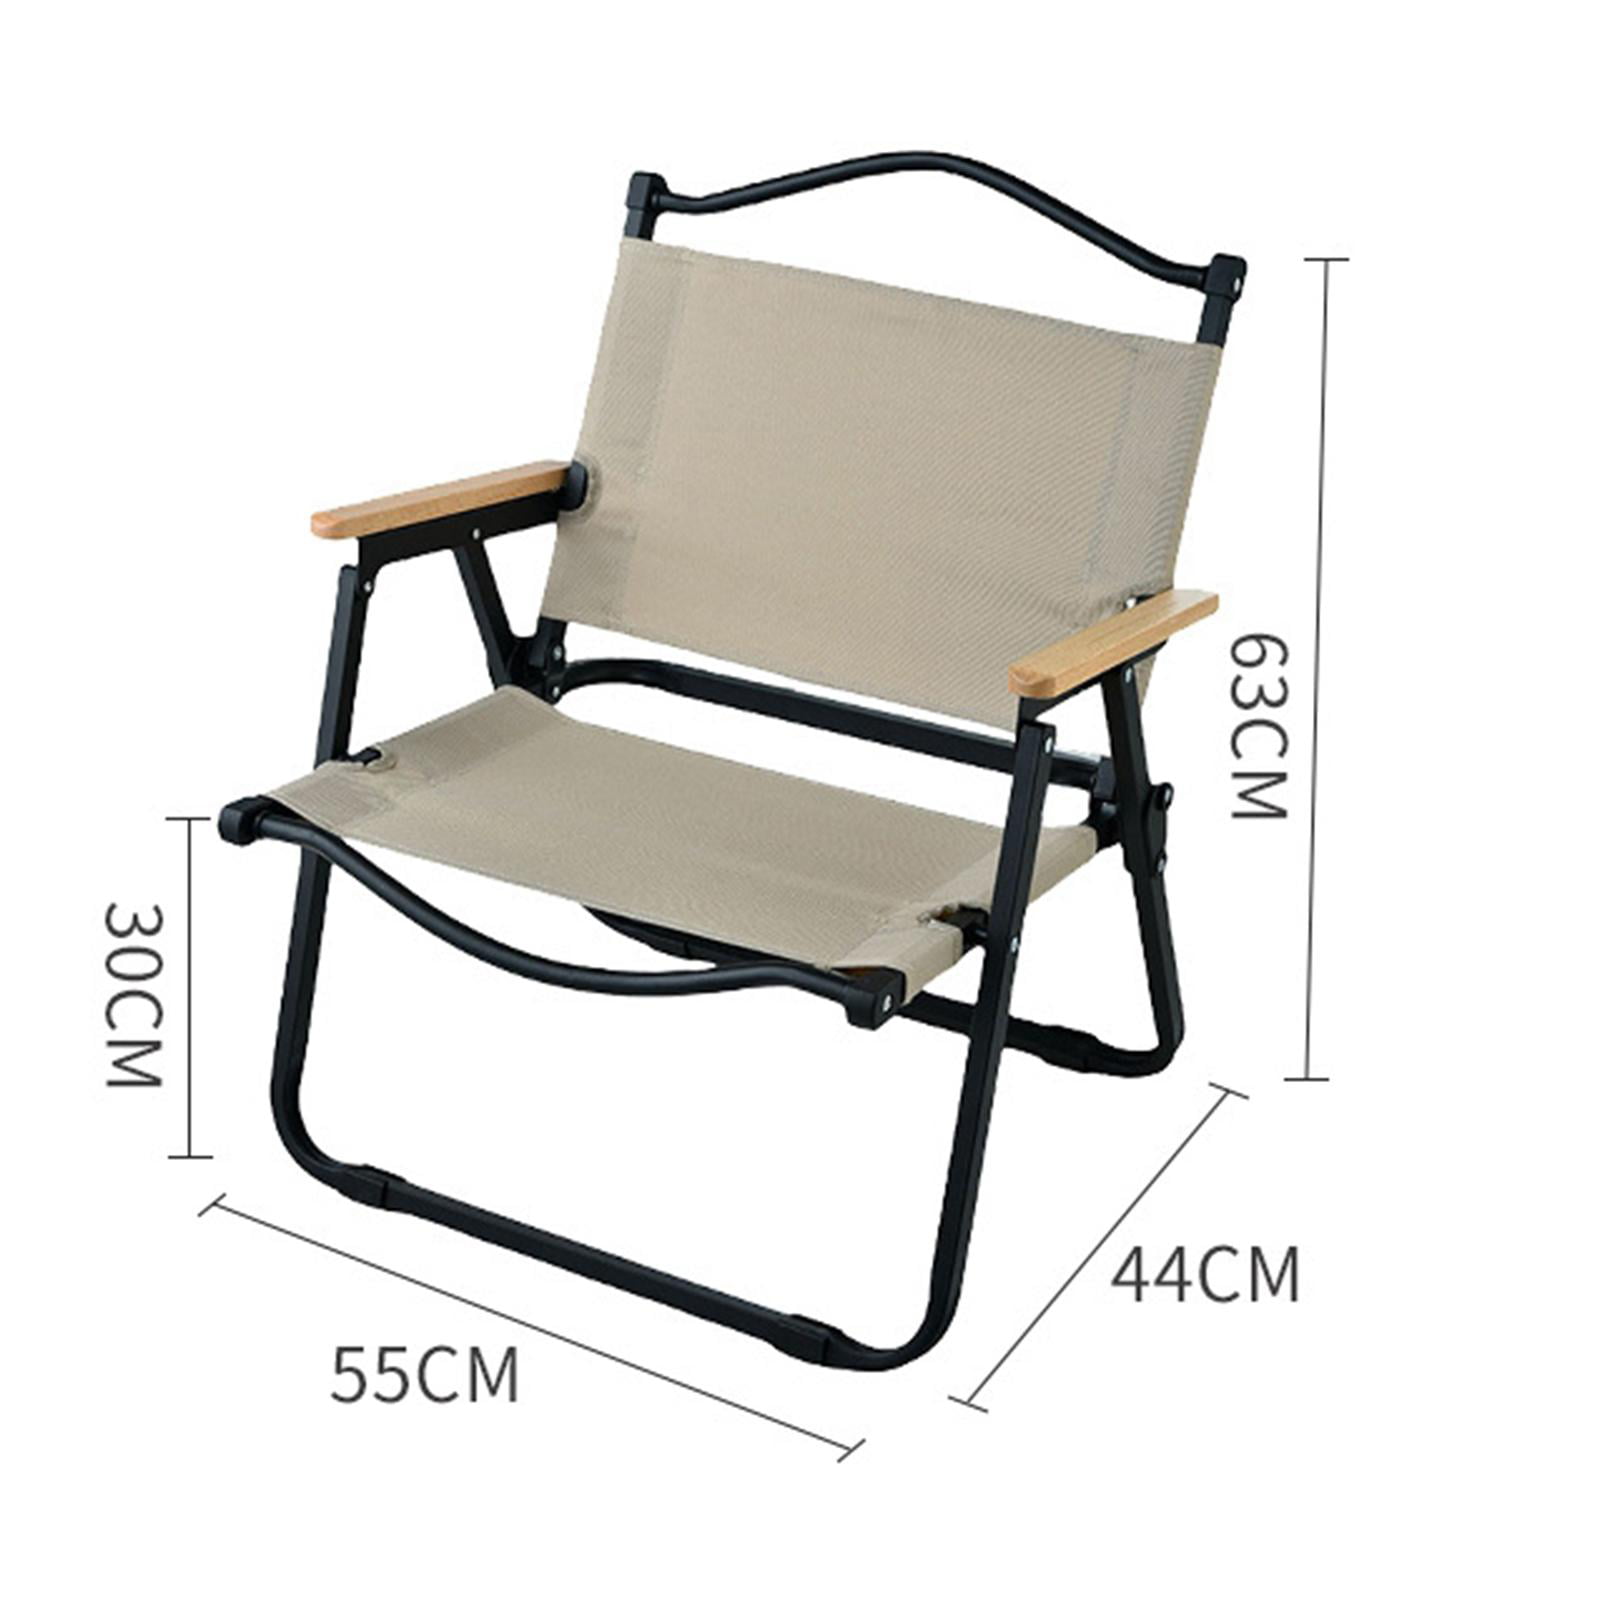 Camping Folding Chair High Back Heavy Duty Holds 500lbs Outdoor Furniture  Lightweight Armchair Portable for Garden Lawn Beach Sports S 